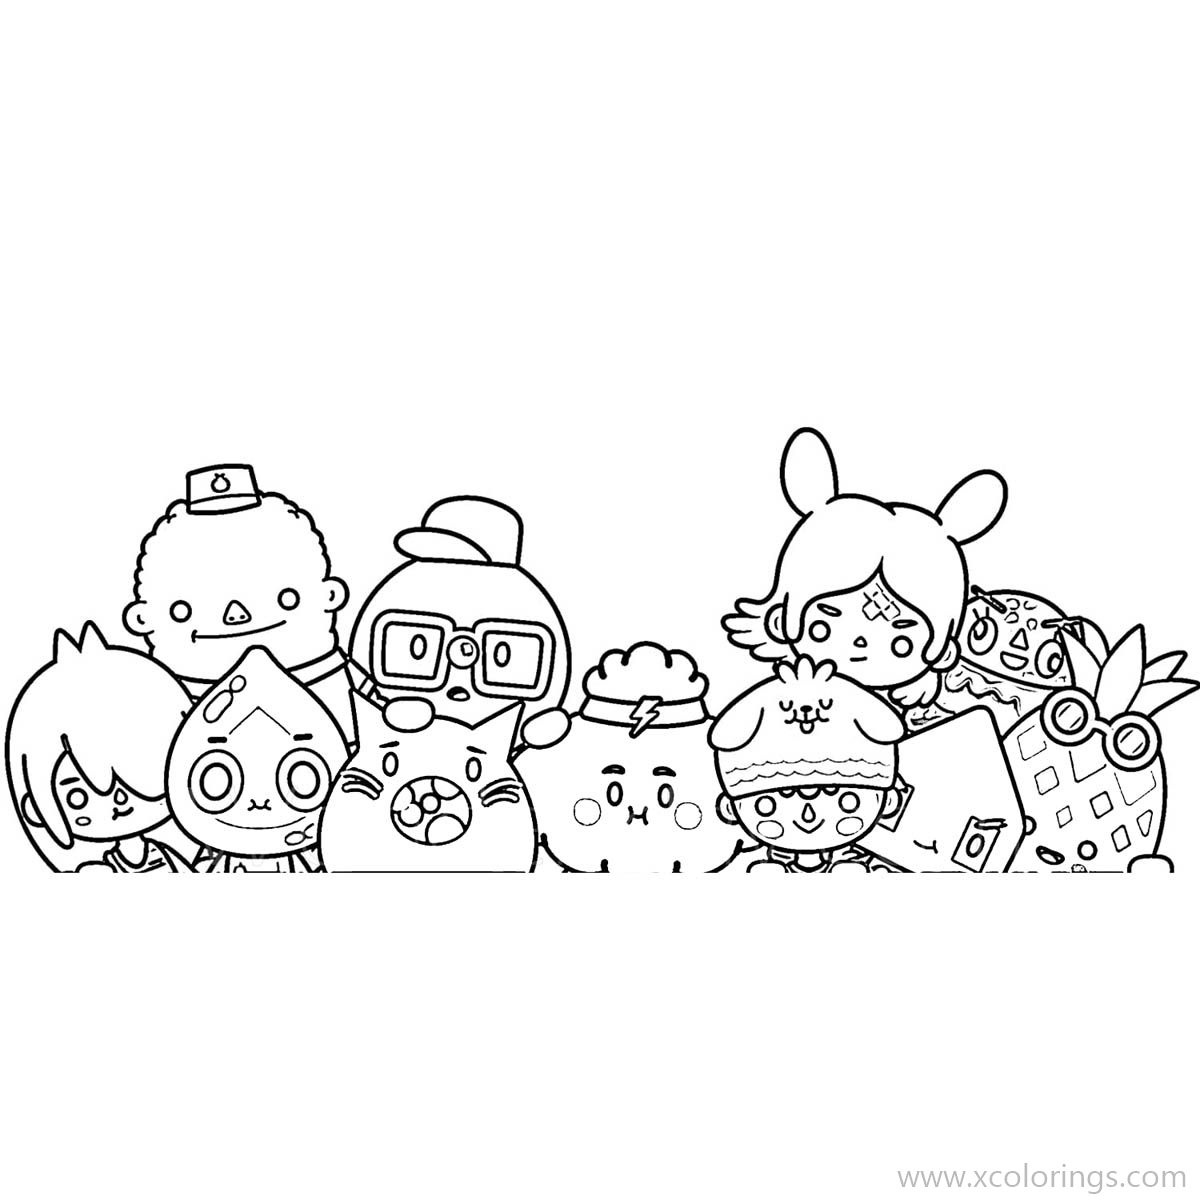 Free Toca Boca Characters Coloring Pages printable